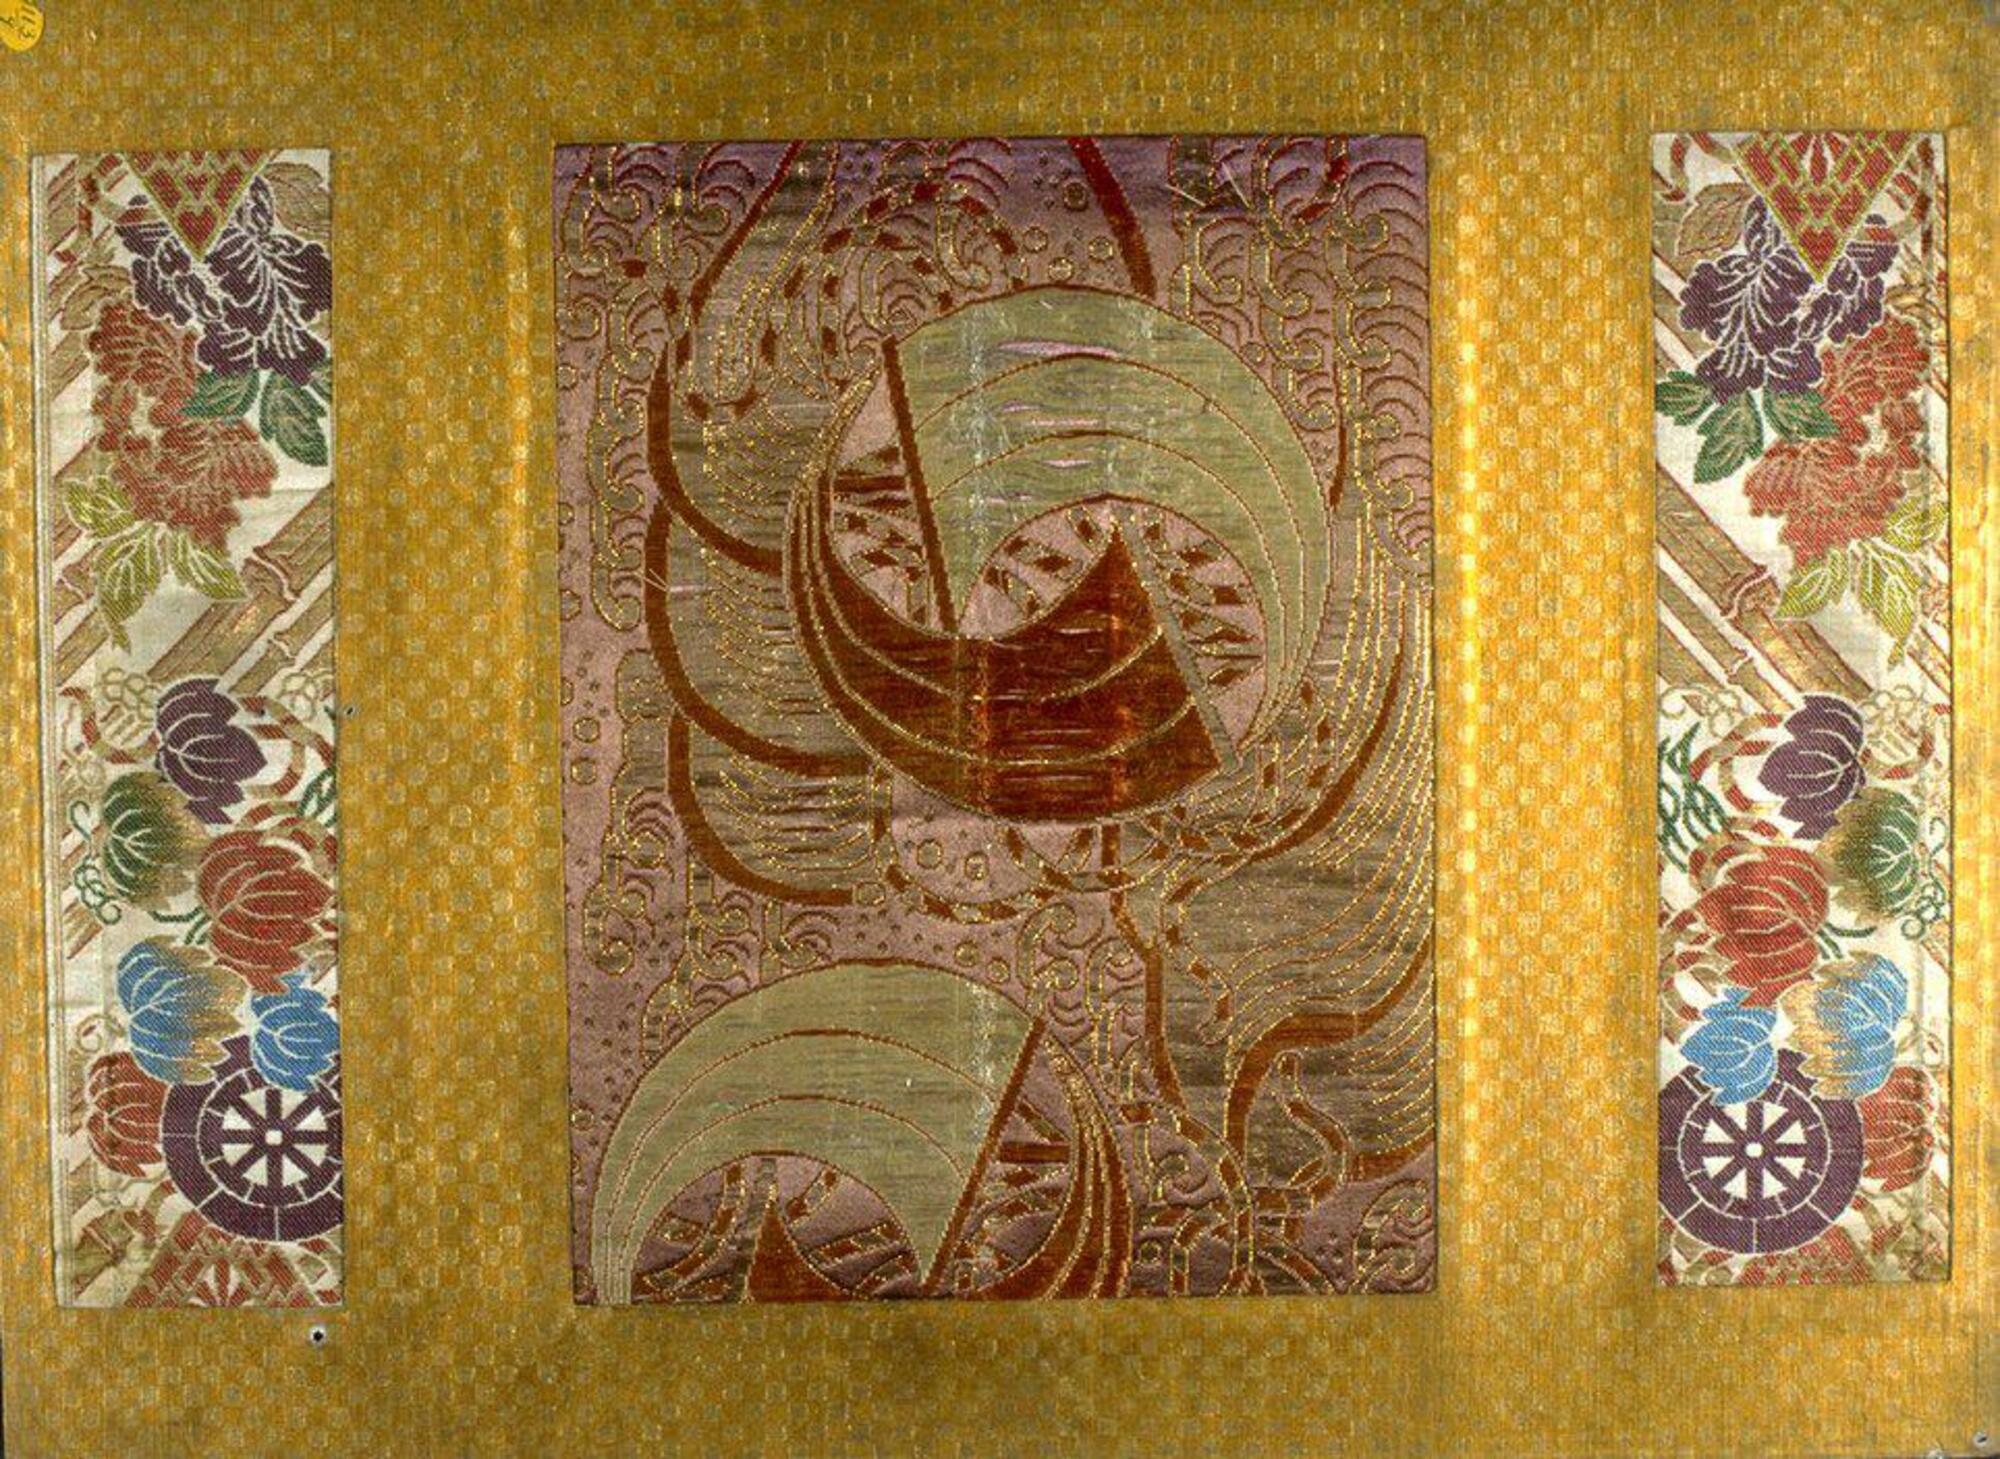 The colorful strips of brocade at the top and bottom of this panel feature a woven design of ivy and peonies entwined around cartwheels, bamboo, and stylized diamonds. A wide rectangular fragment of an obi (sash for kimono) lie at the center of the textile. It is an almost abstract design of boats tossed in a frothy sea. The warm, muted tones of the gold are matched in color selections of mauve, and muted purple, blue, and green threads.